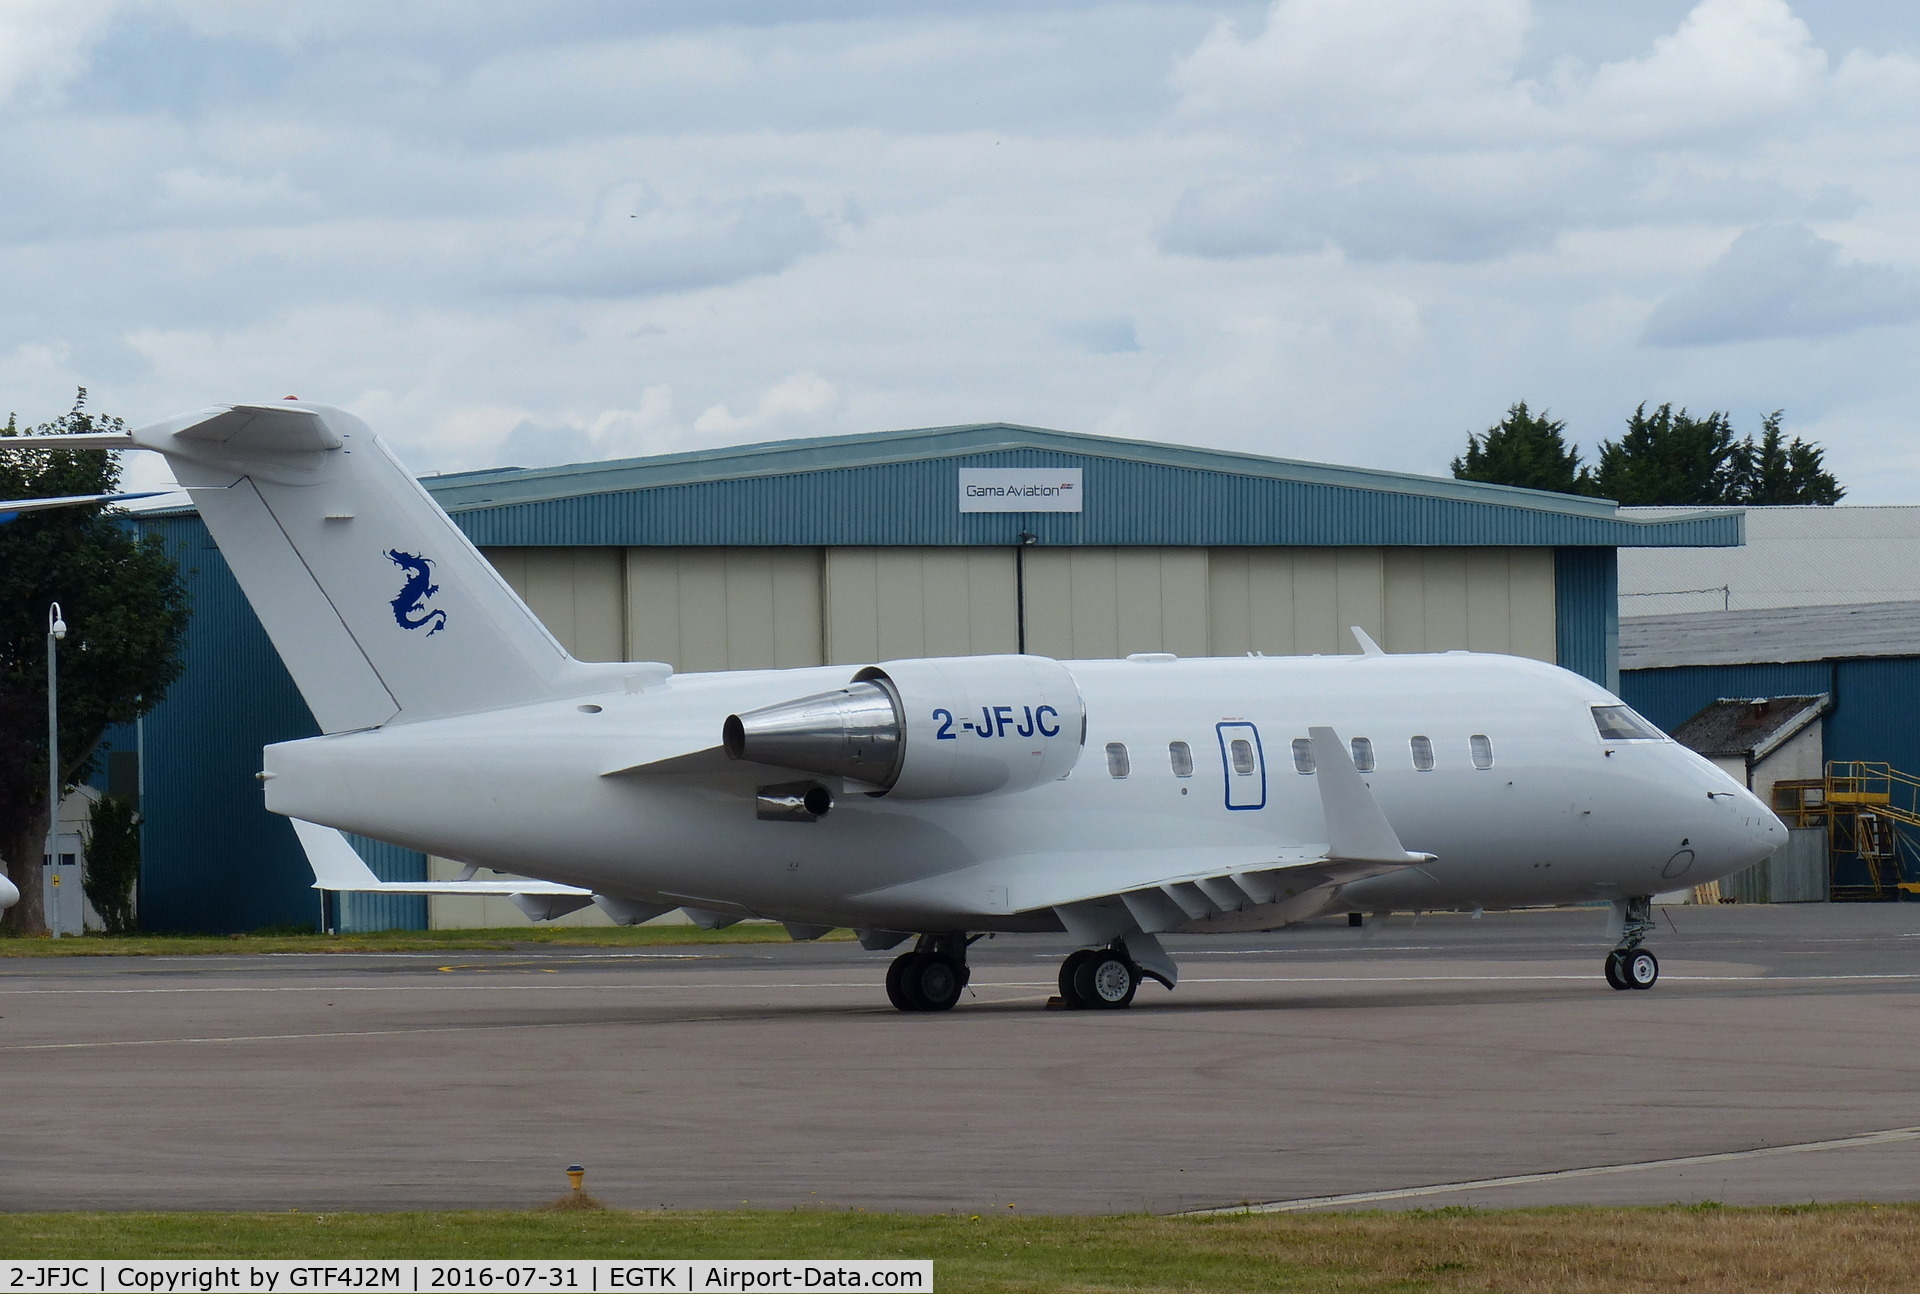 2-JFJC, 1988 Canadair Challenger 601-3A (CL-600-2B16) C/N 5023, 2-JFJC at Oxford 31.7.16